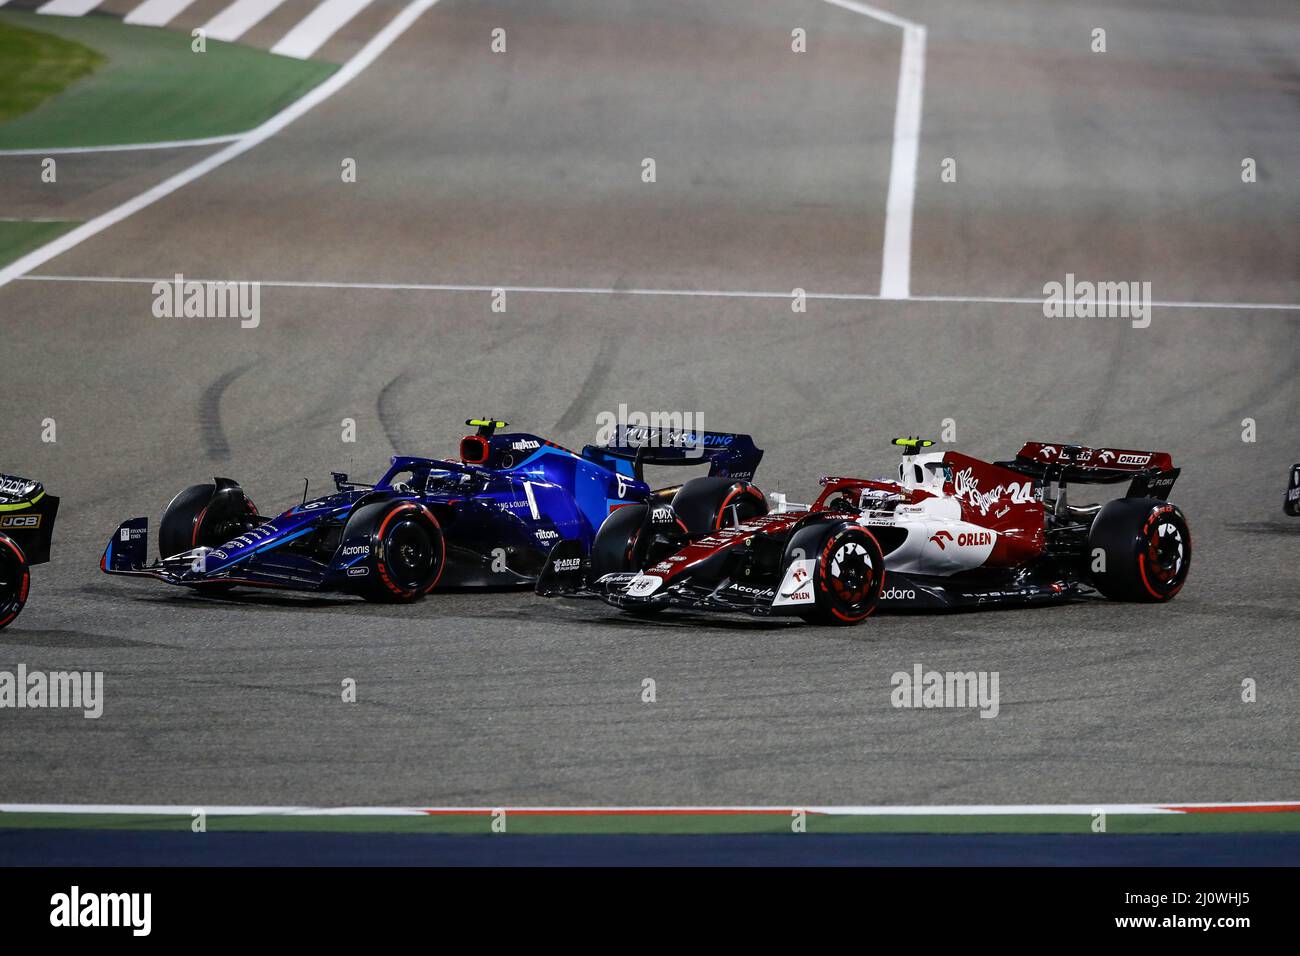 (220321) -- SAKHIR, March 21, 2022 (Xinhua) -- Alfa Romeo's Chinese driver Zhou Guanyu (R) competes during the Bahrain Formula One Grand Prix at the Bahrain International Circuit in the city of Sakhir on March 20, 2022. (DPPI/Handout via Xinhua) Stock Photo